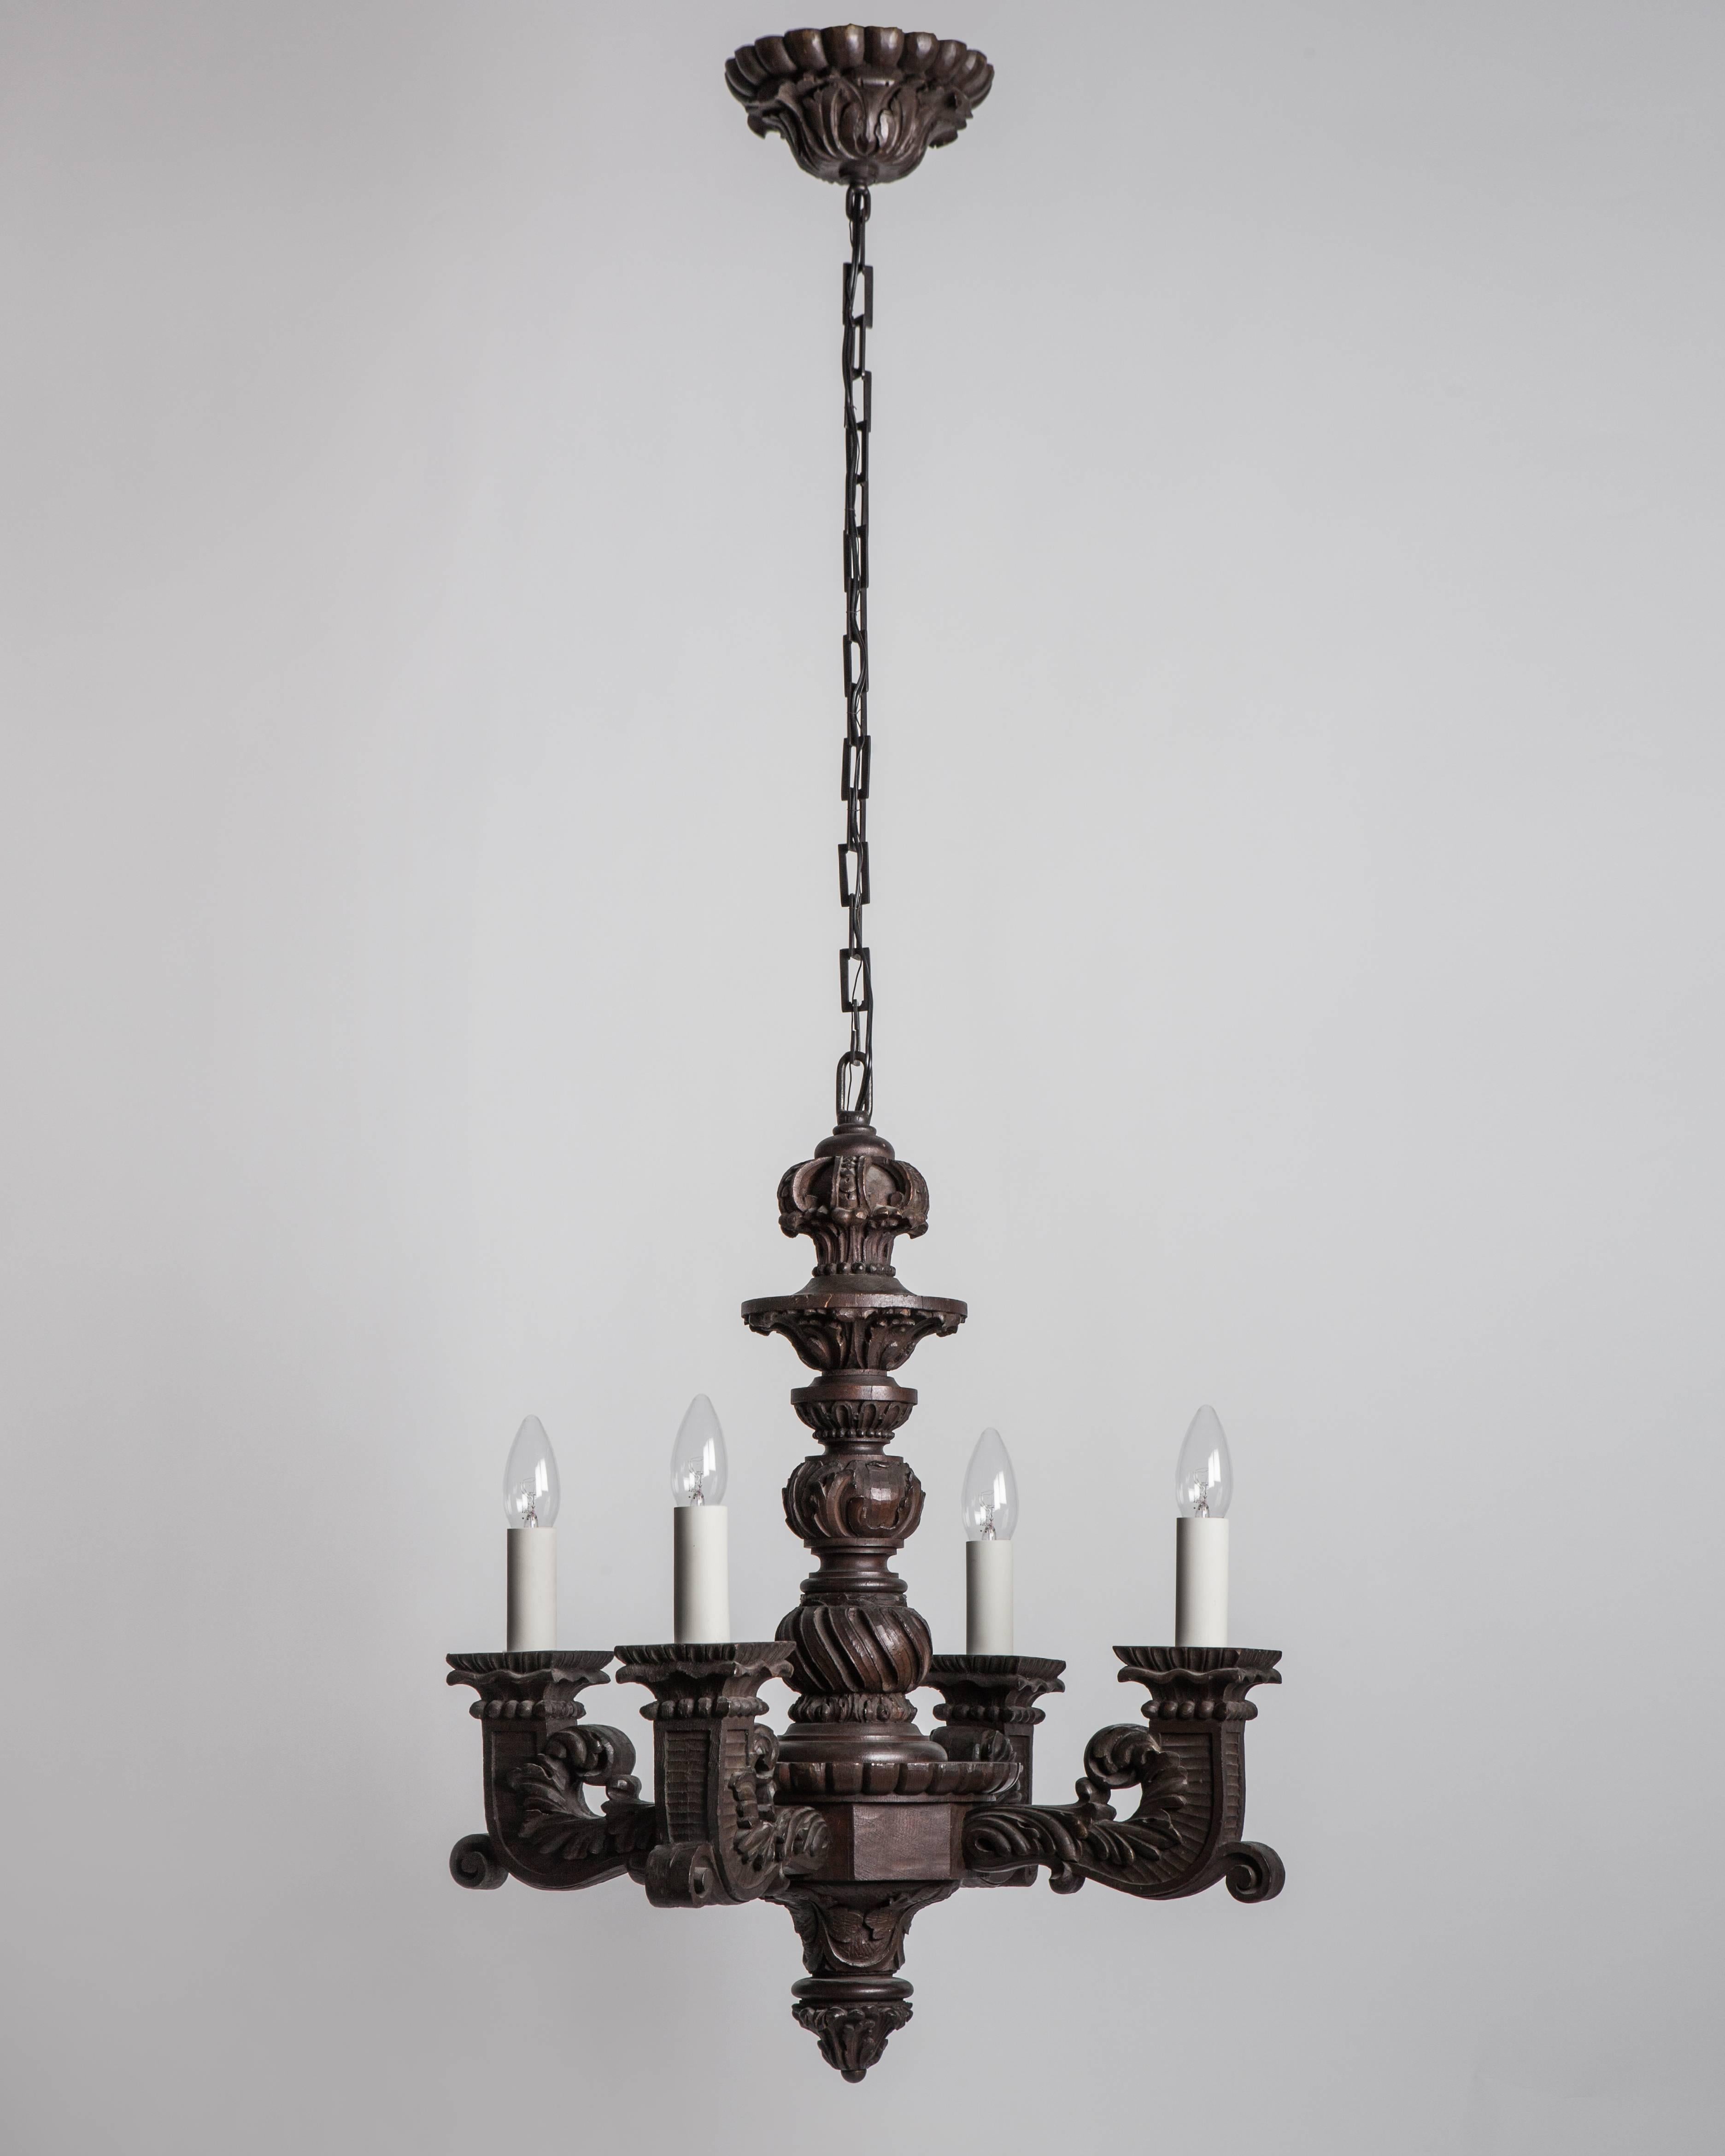 AHL2961
A solid and crisply carved dark wooden four-light chandelier. Having foliate carvings overall and accented by faceted prism pendants. From a Hudson River estate in Athens, NY.

Dimensions:
Current height 57-1/2